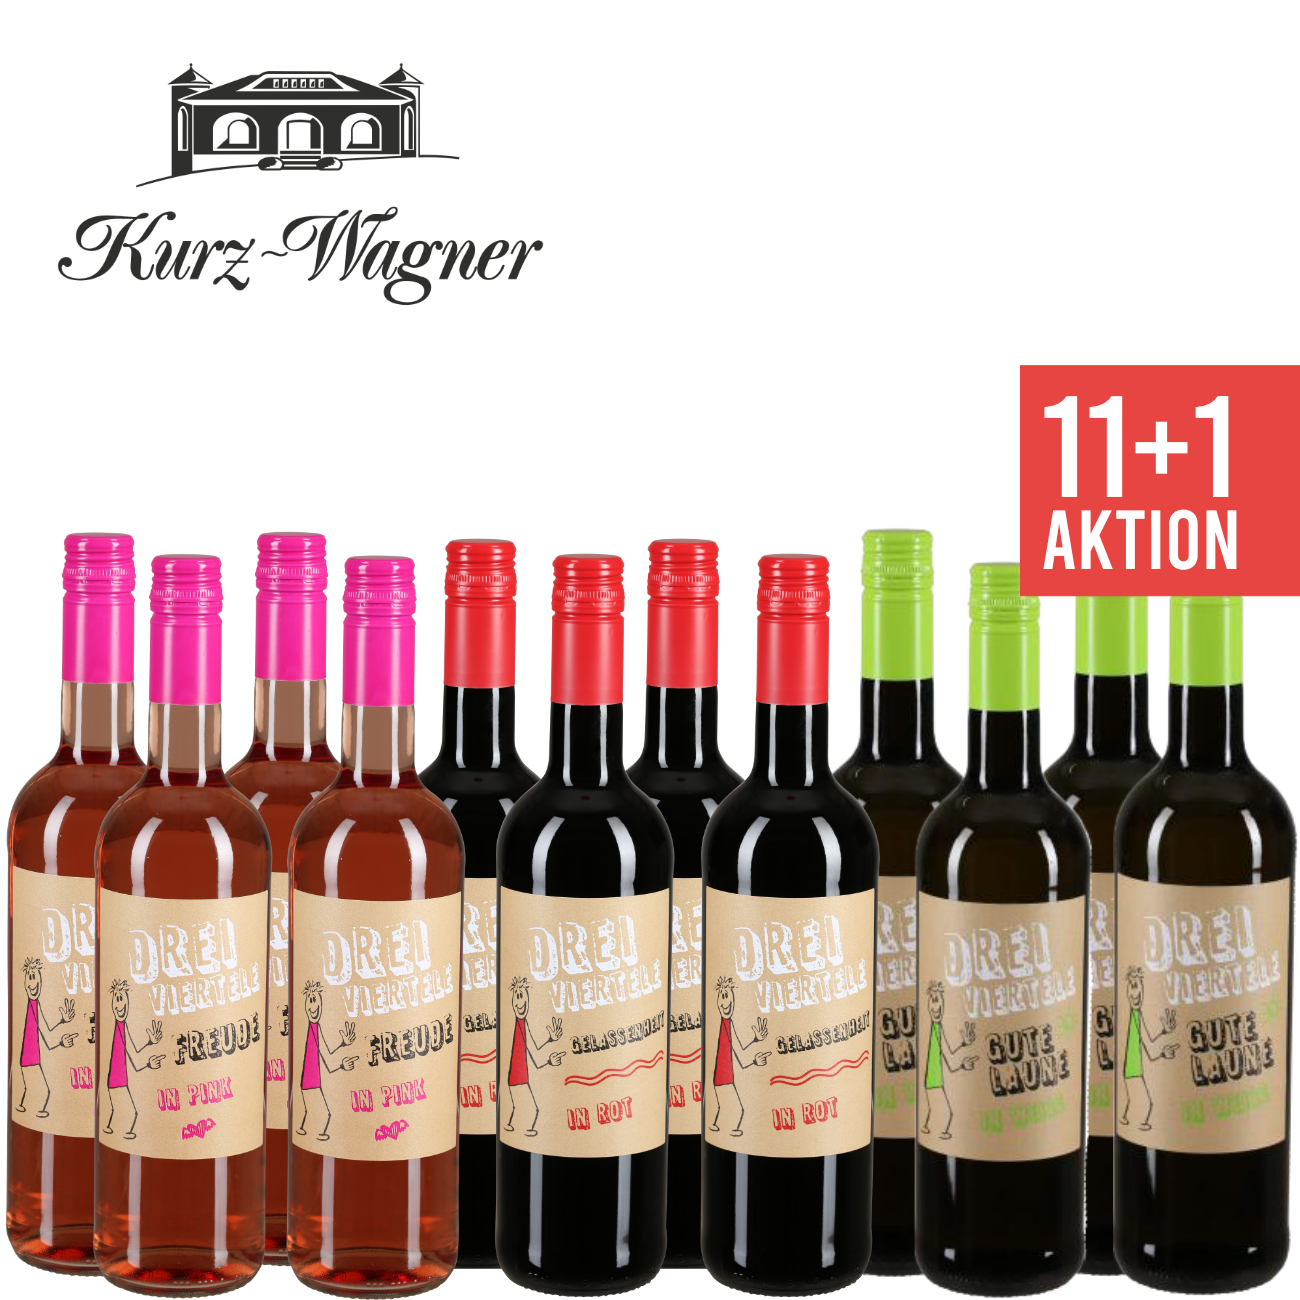 The our wein.plus members wein.plus Find+Buy: wines | Find+Buy of